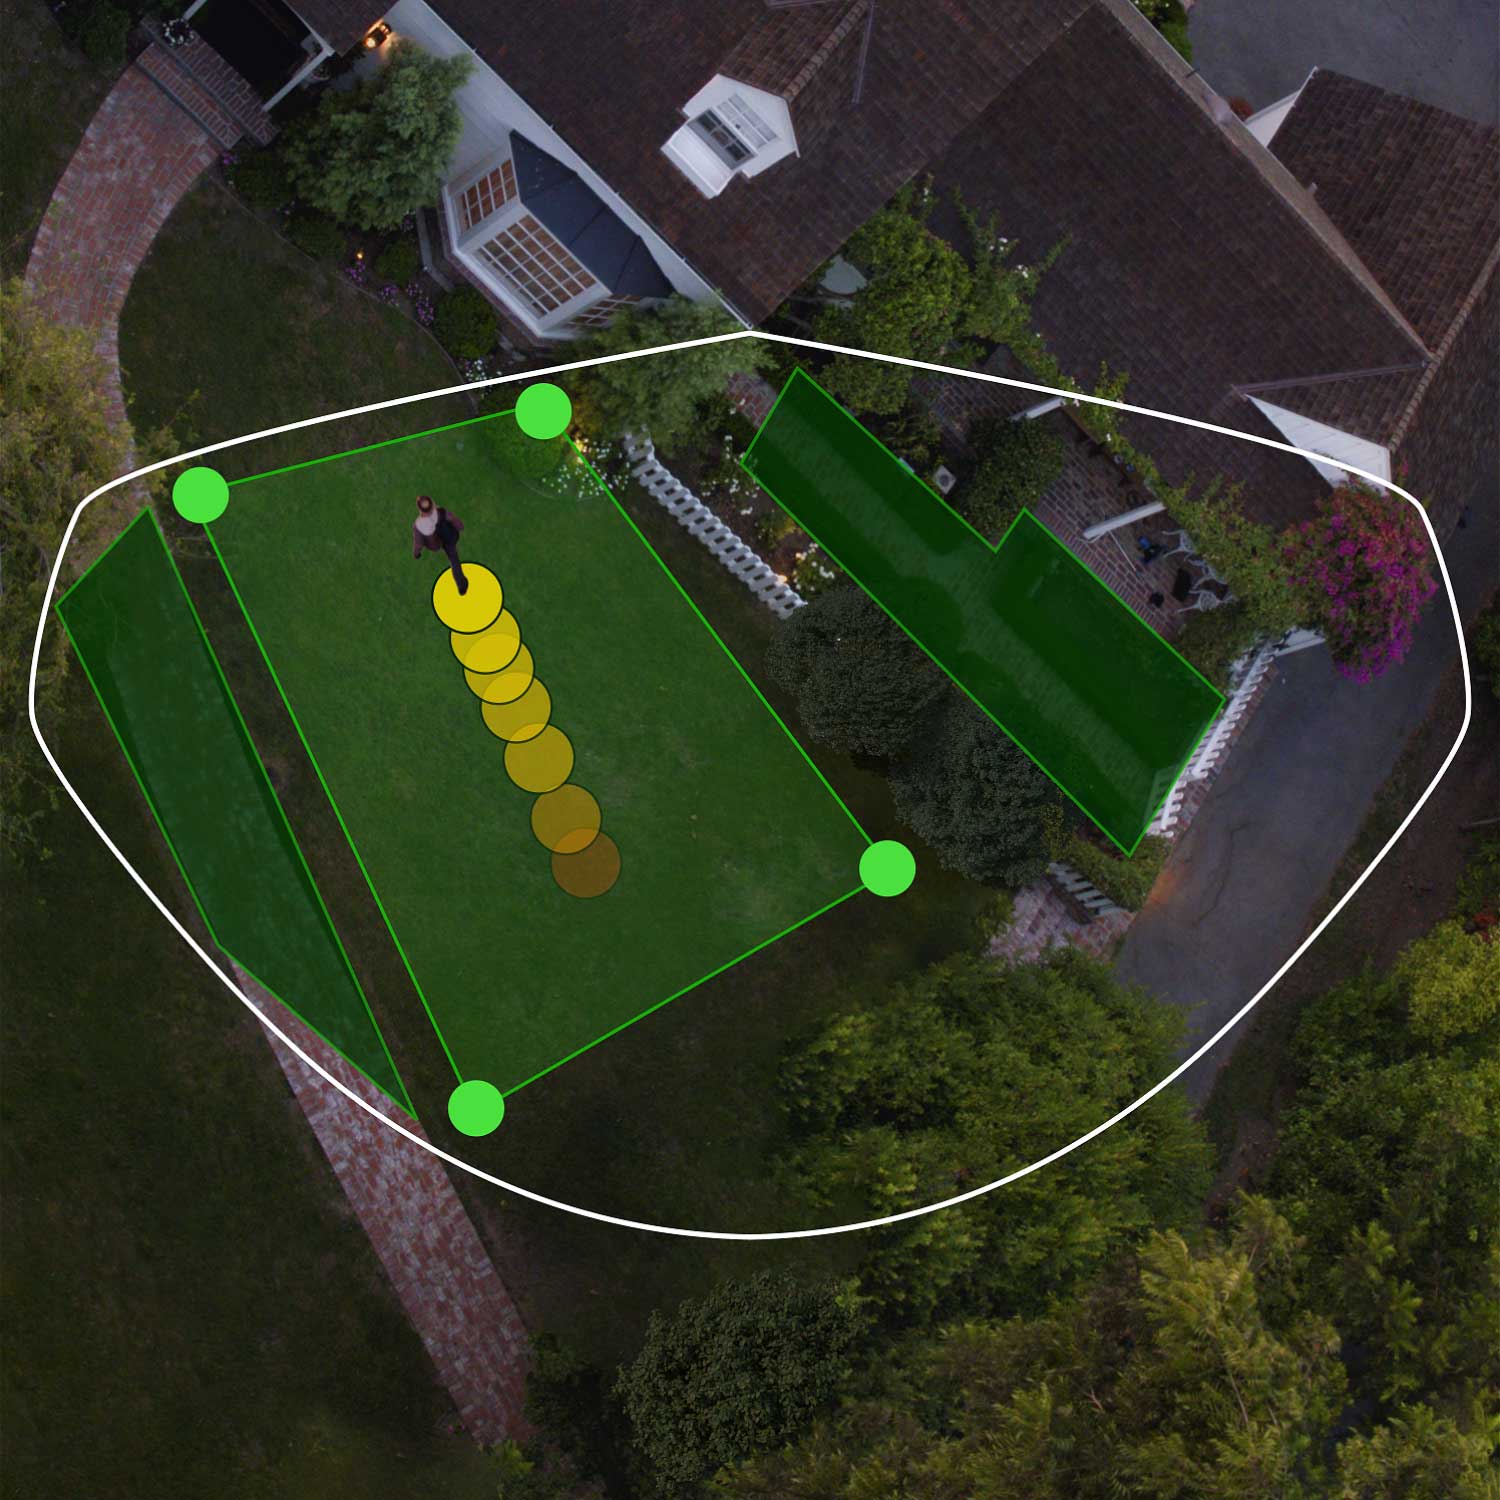 Floodlight Cam Pro (Wired) - Aerial view of front of house showing bird's eye view zones in green. Person walks toward front door, their path indicated by yellow dots.